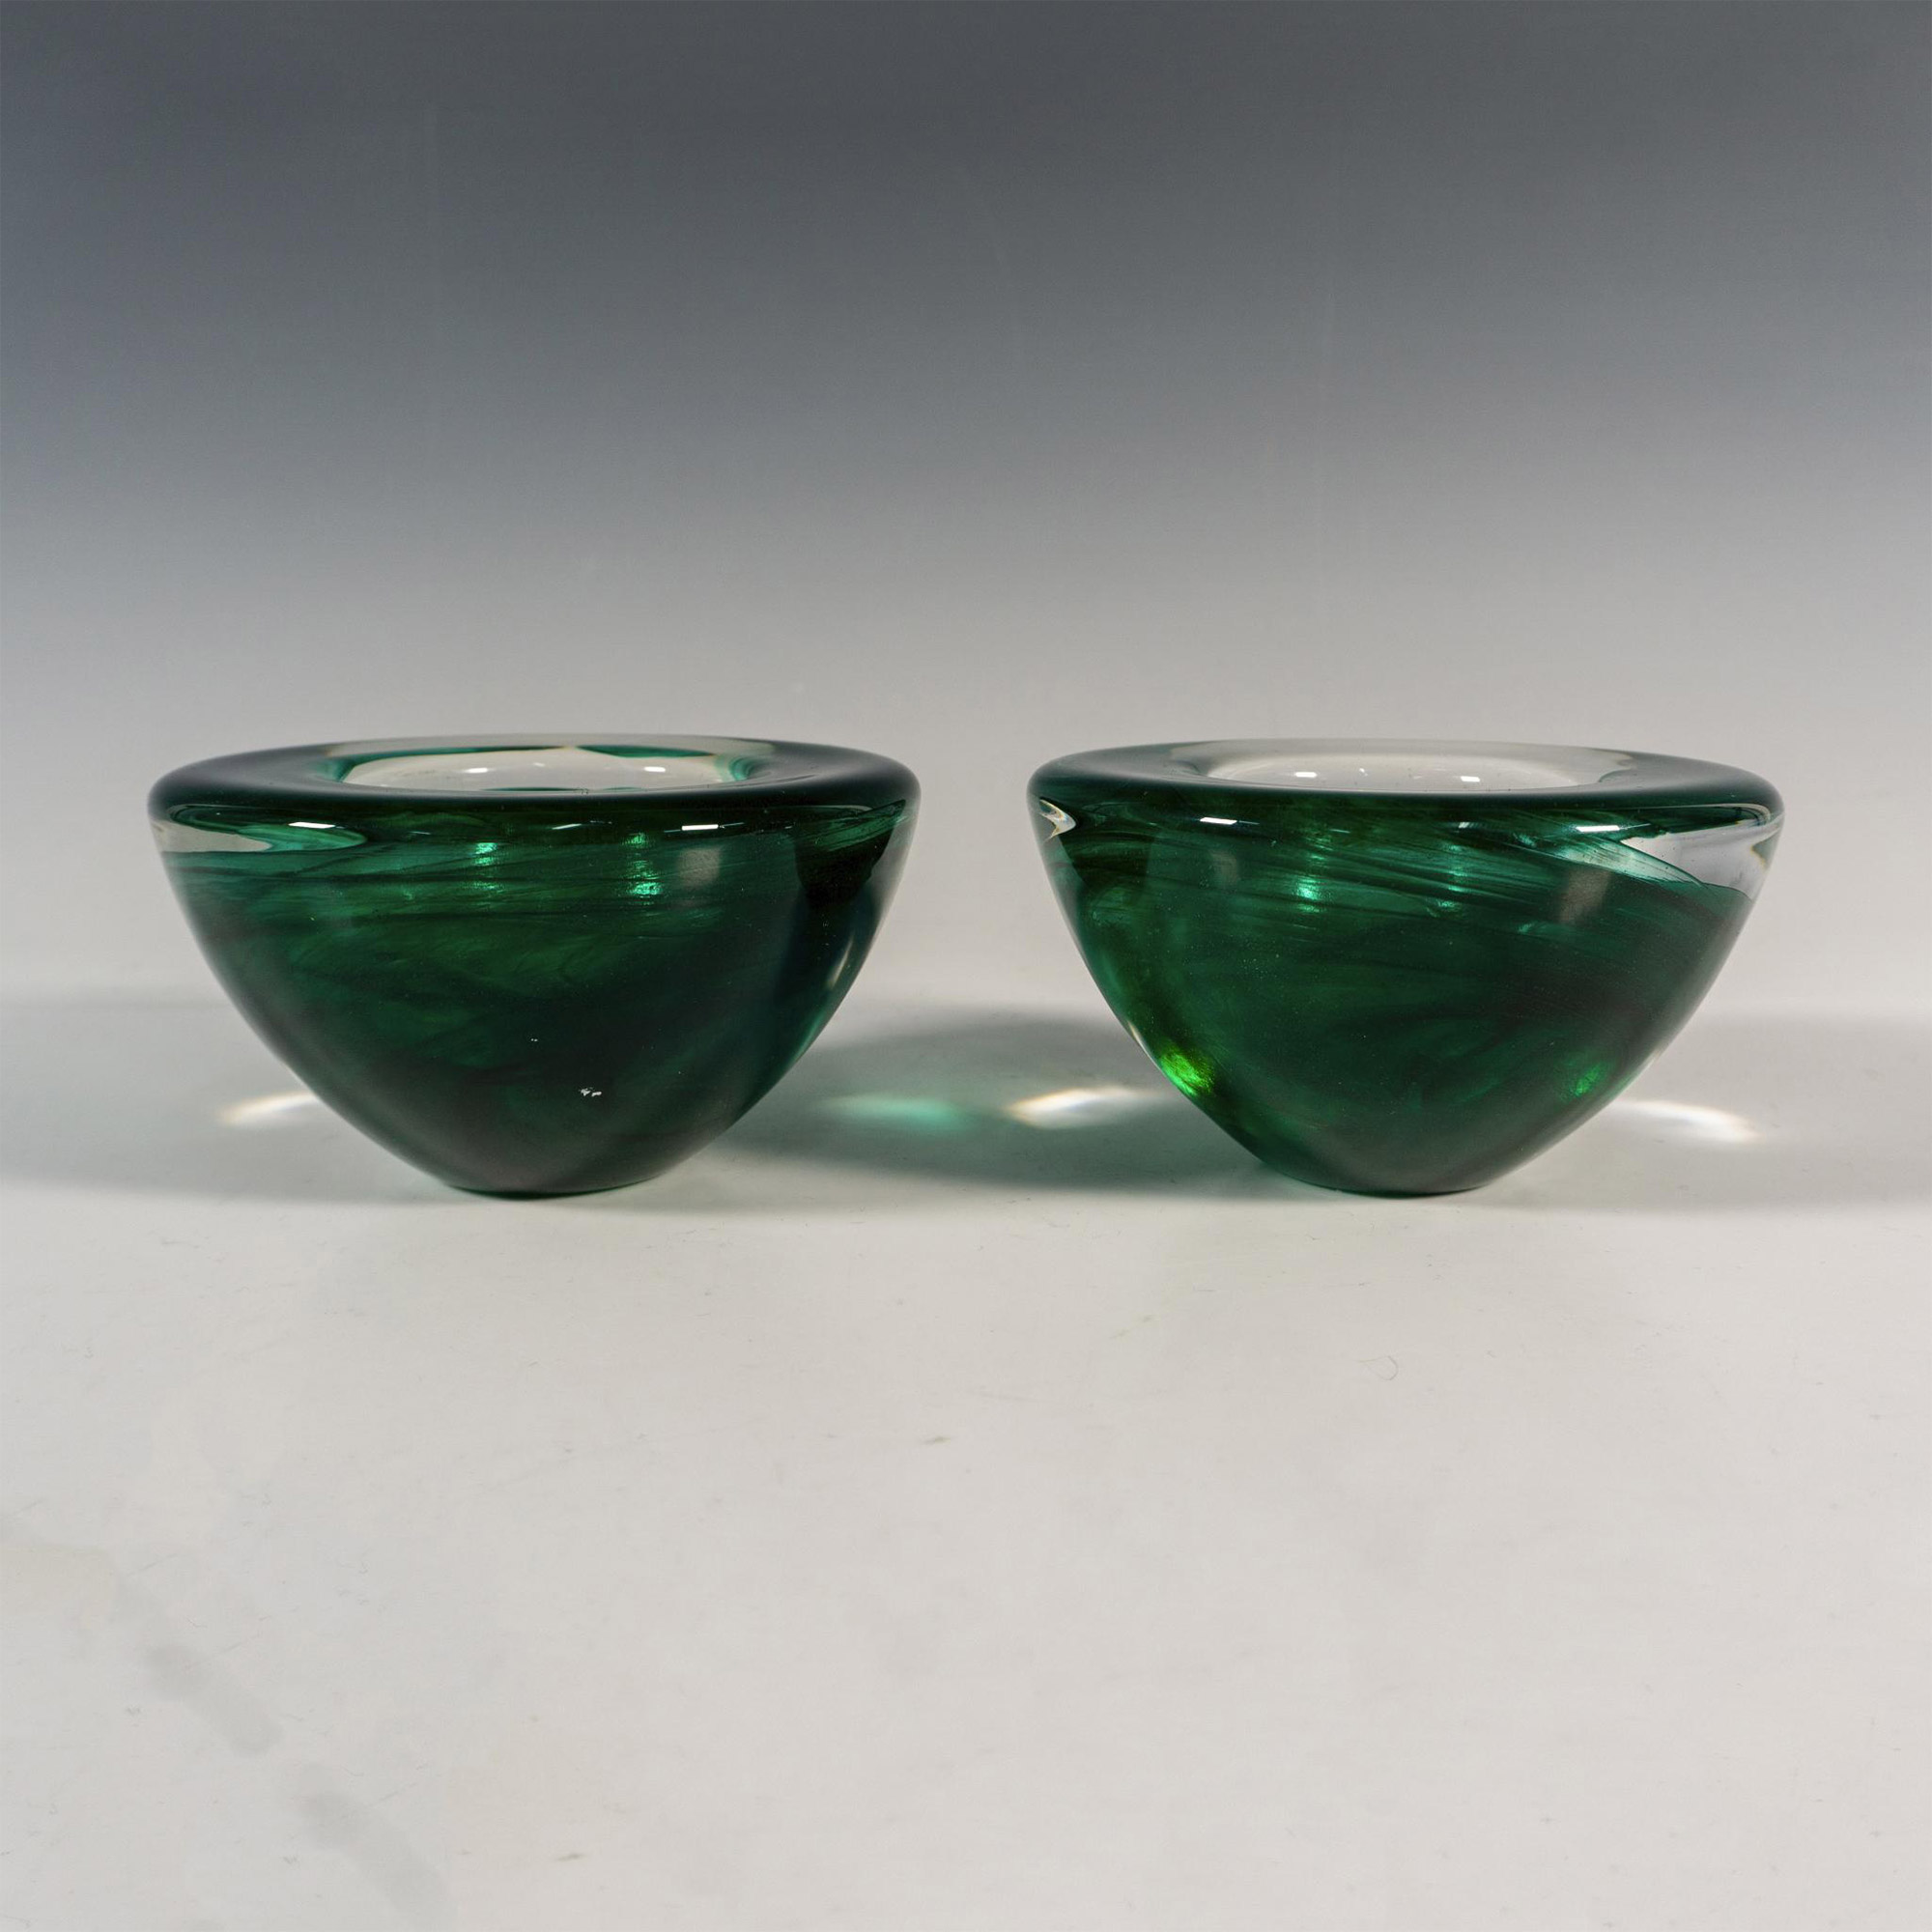 Pair of Kosta Boda by Anna Ehrner Candle Holders, Atoll - Image 3 of 5